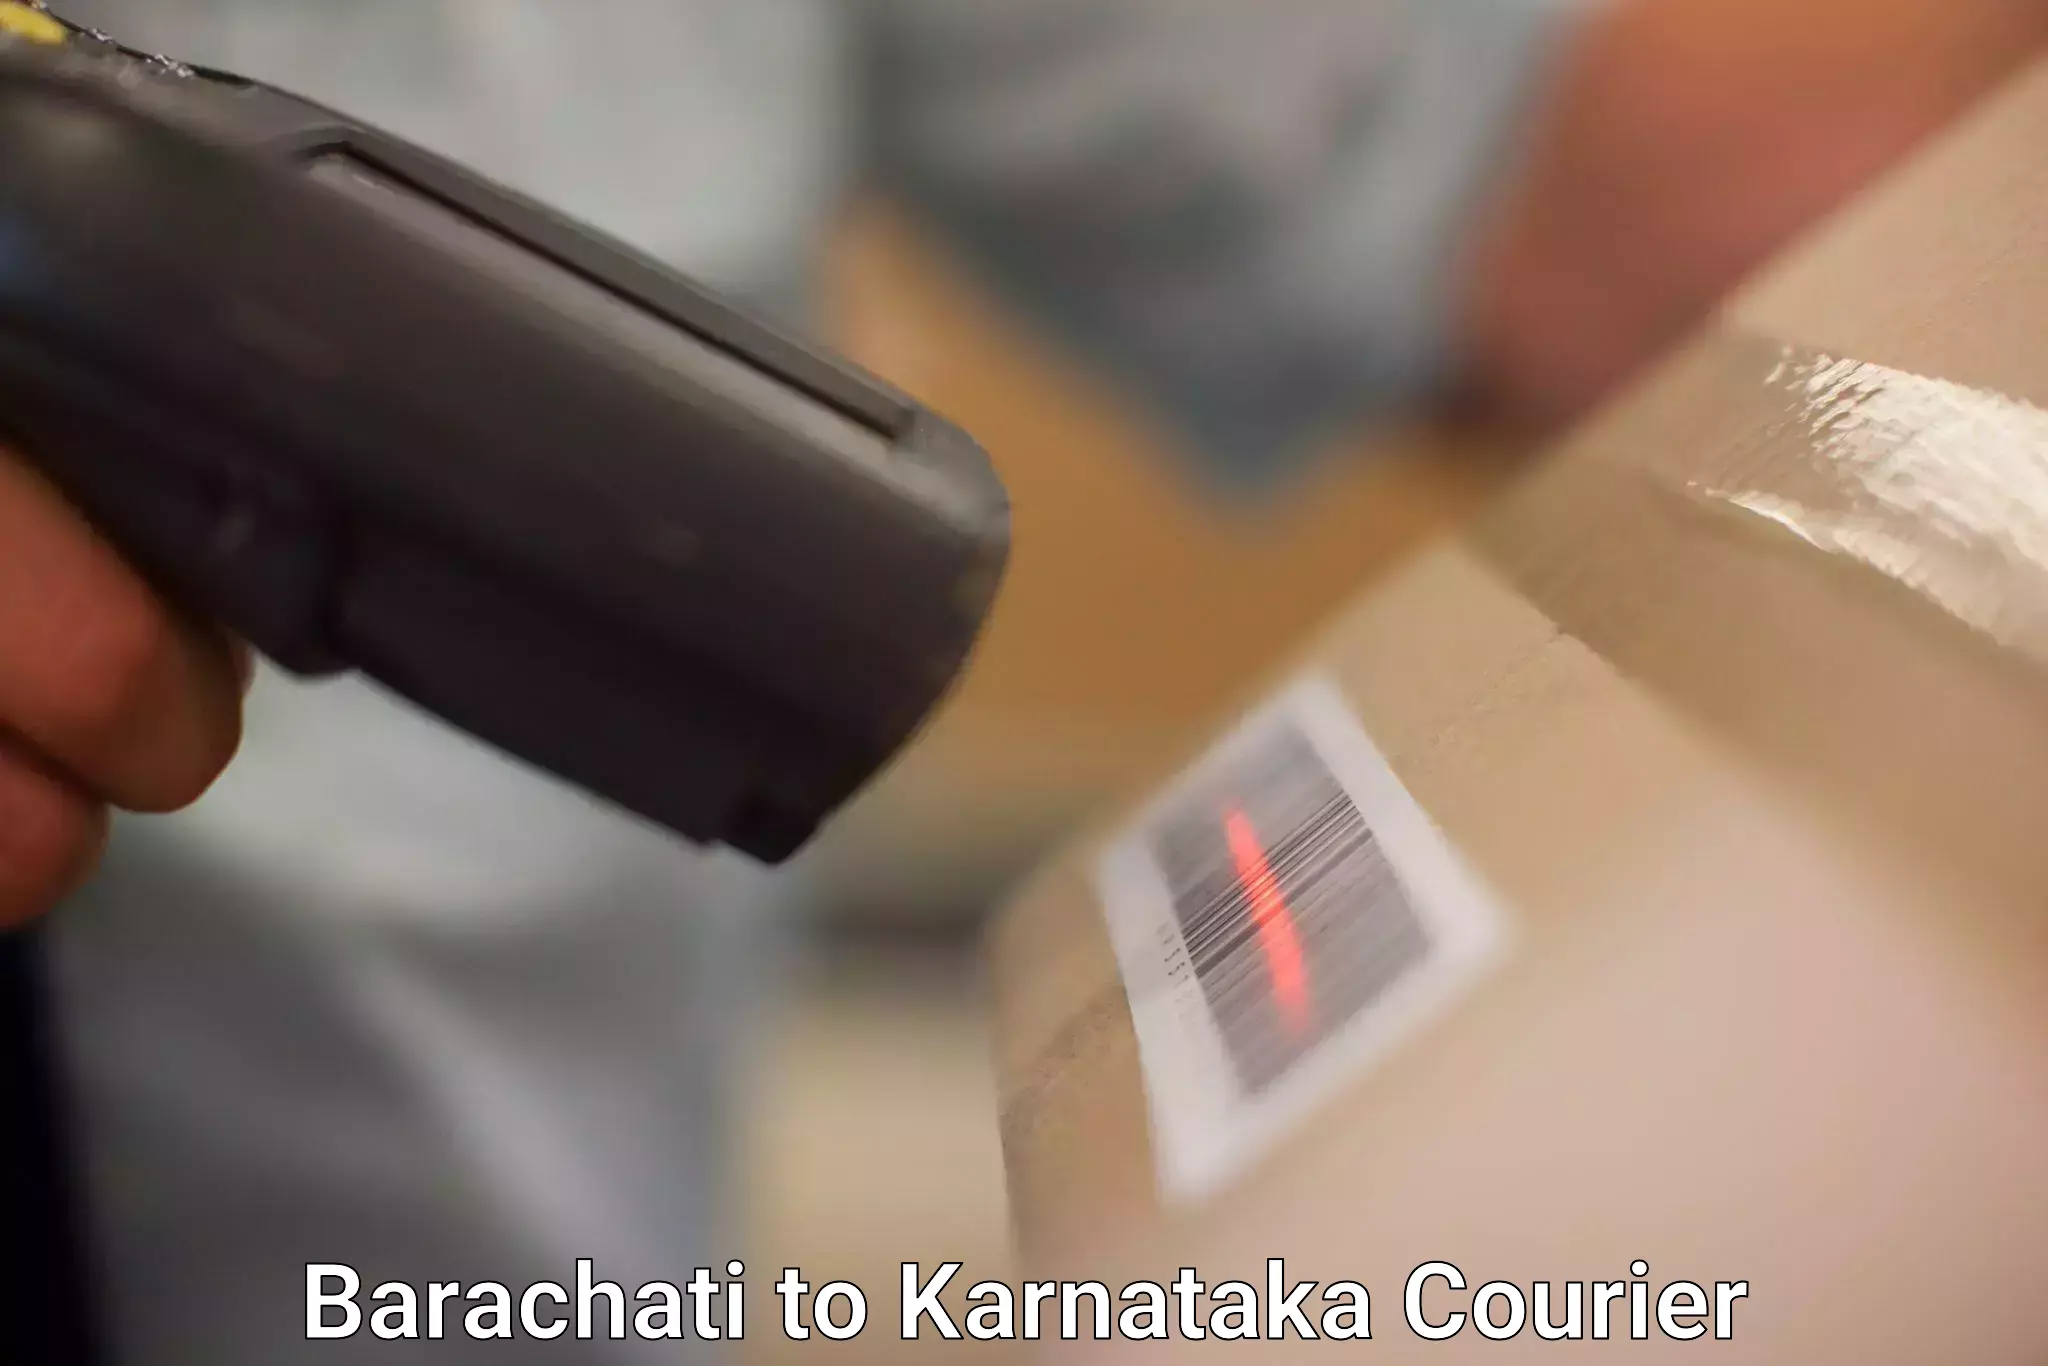 Professional courier handling Barachati to Sirsi